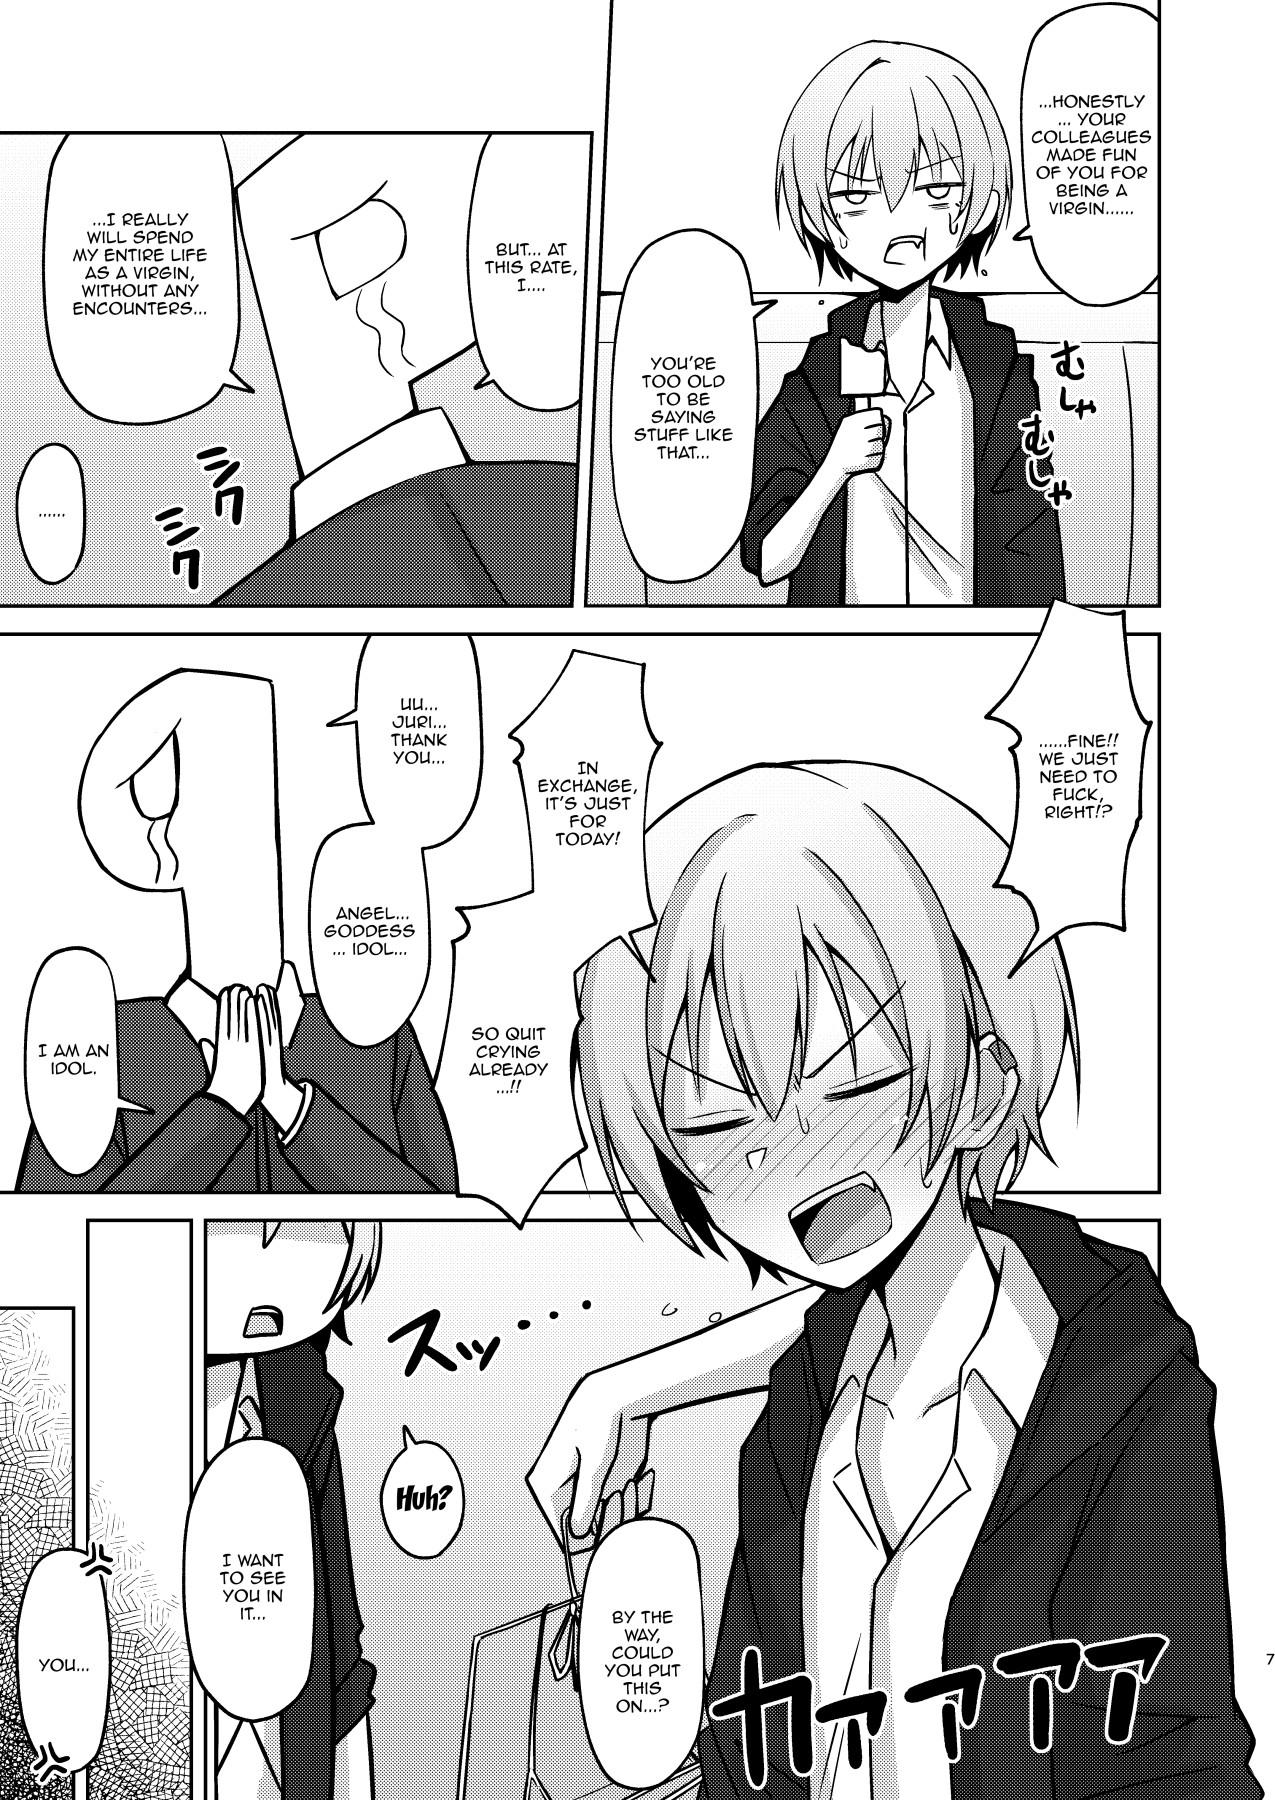 Top H nante Zettee Yannee kara na!! | There's No Way I'll Do Anything Lewd!! - The idolmaster Curious - Page 4